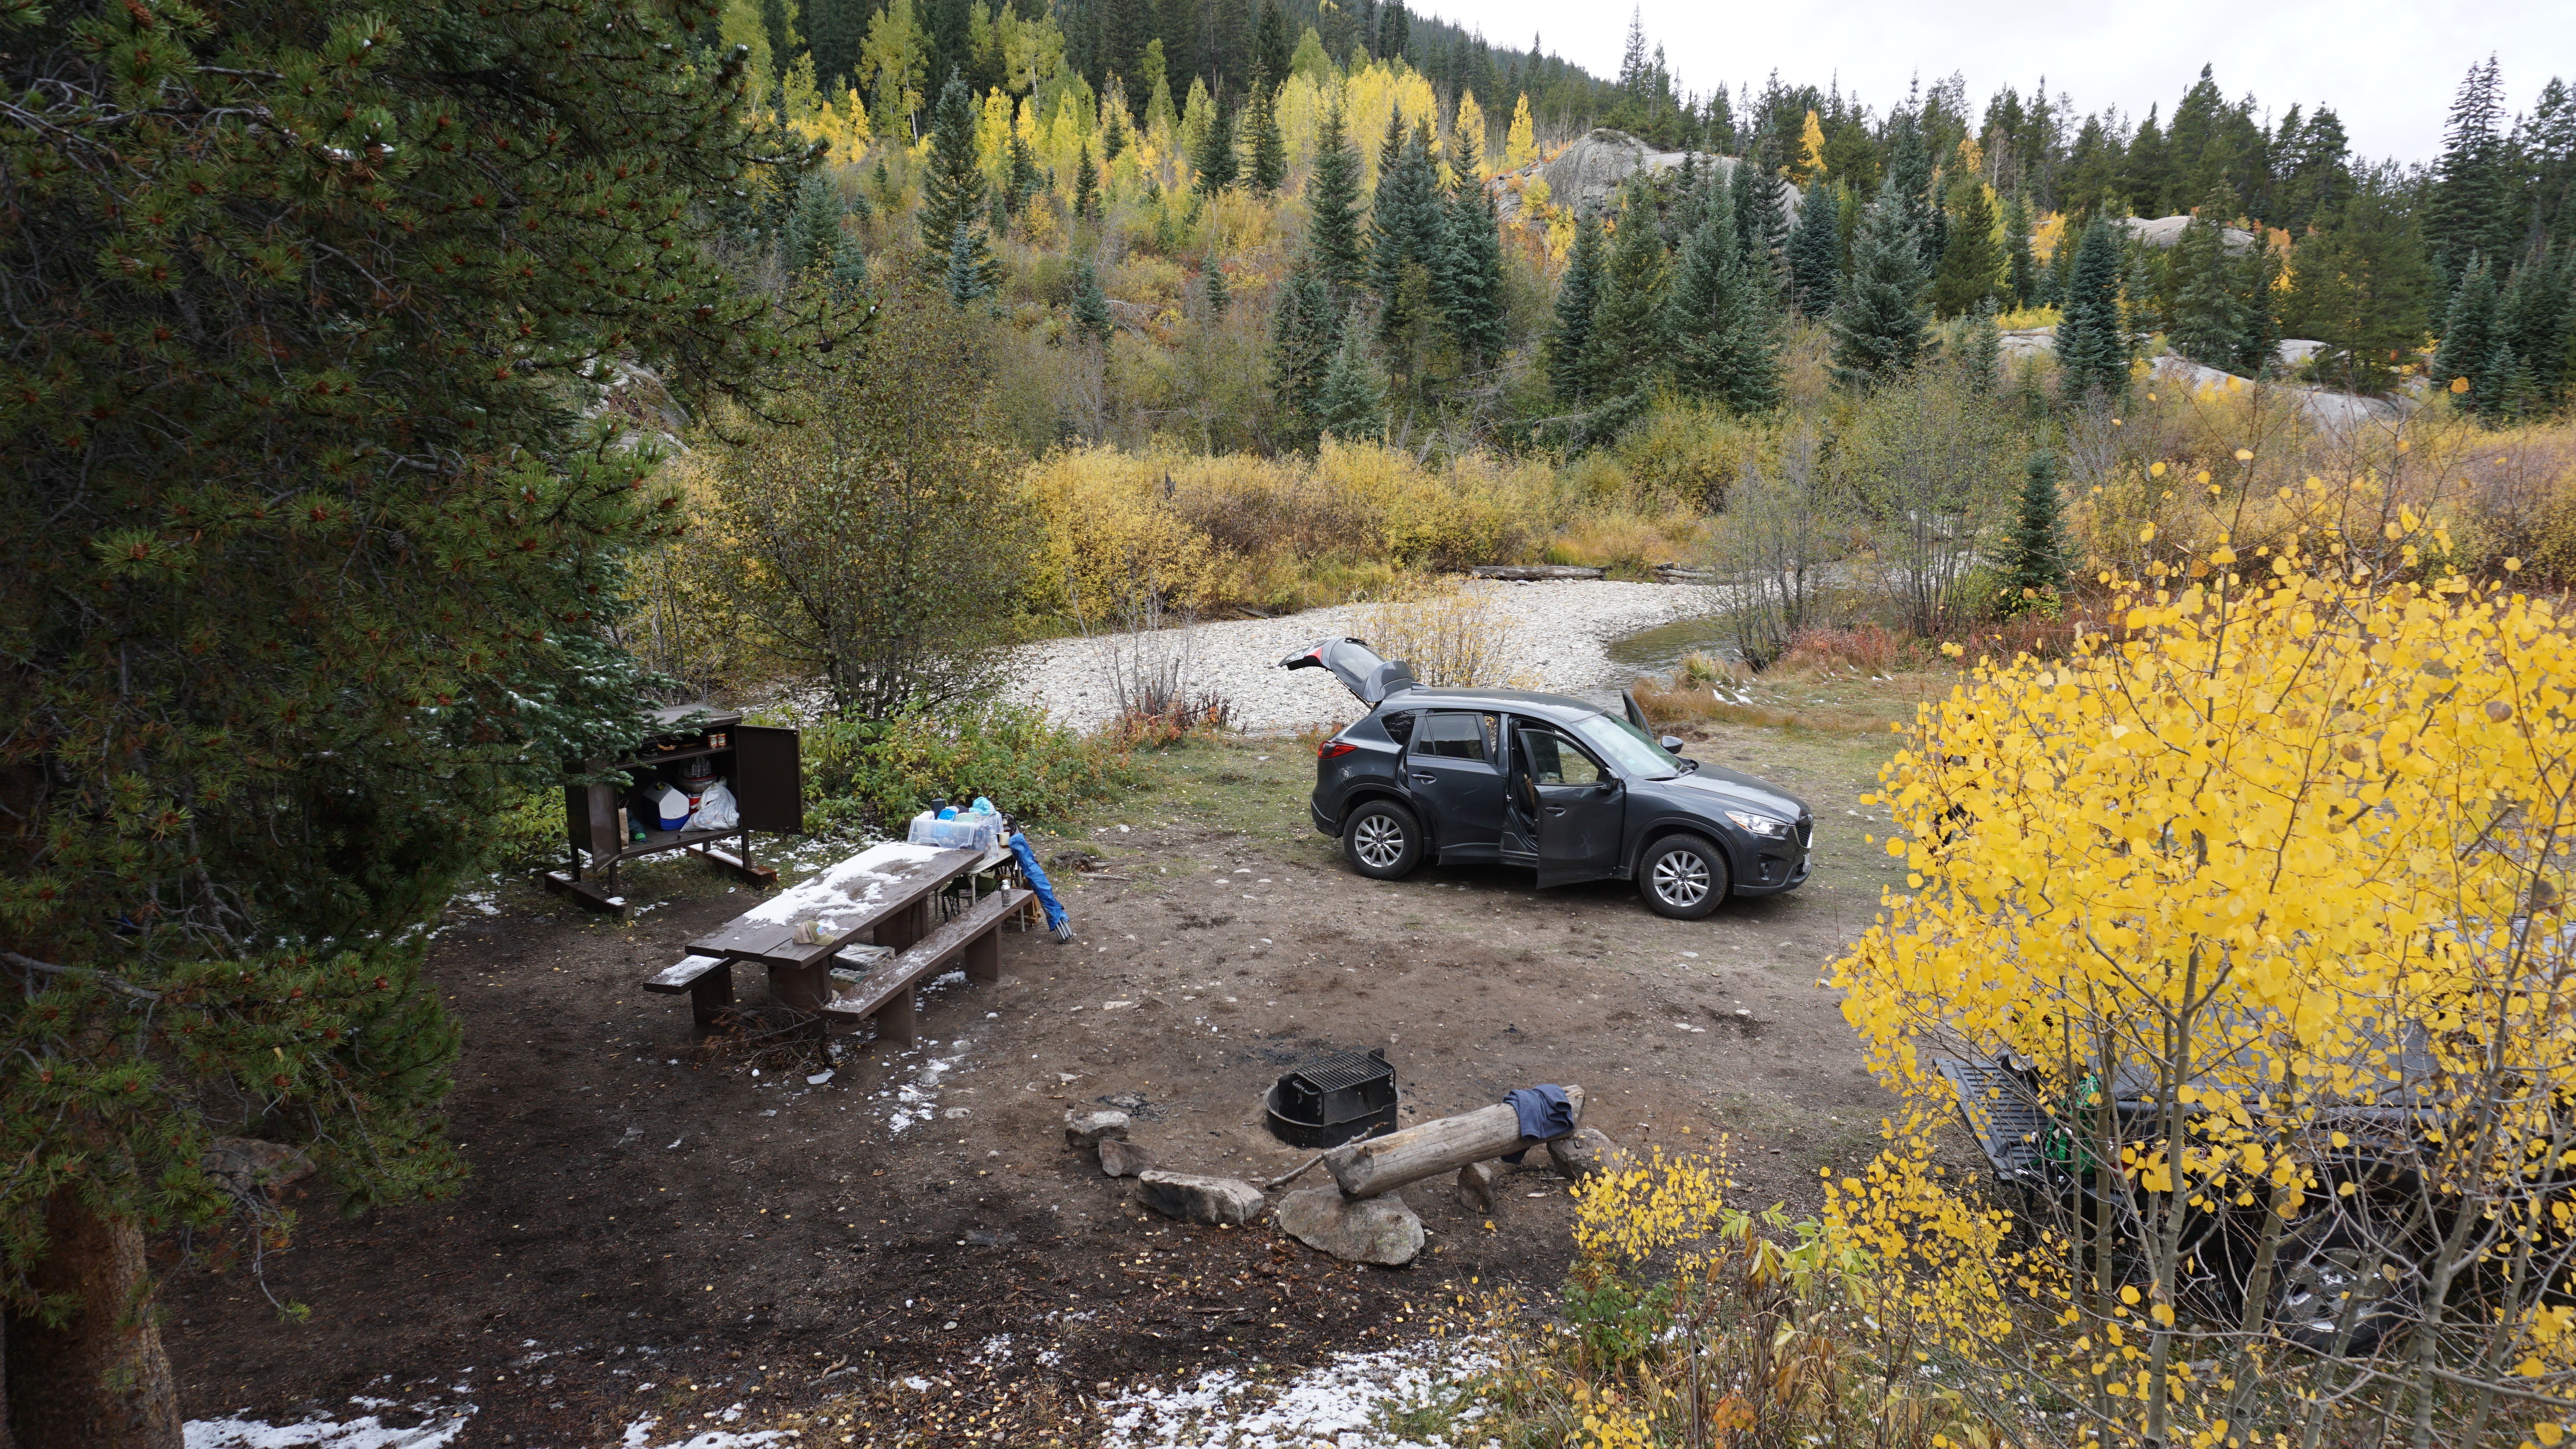 Lincoln Creek Dispersed Campground Camping | The Dyrt